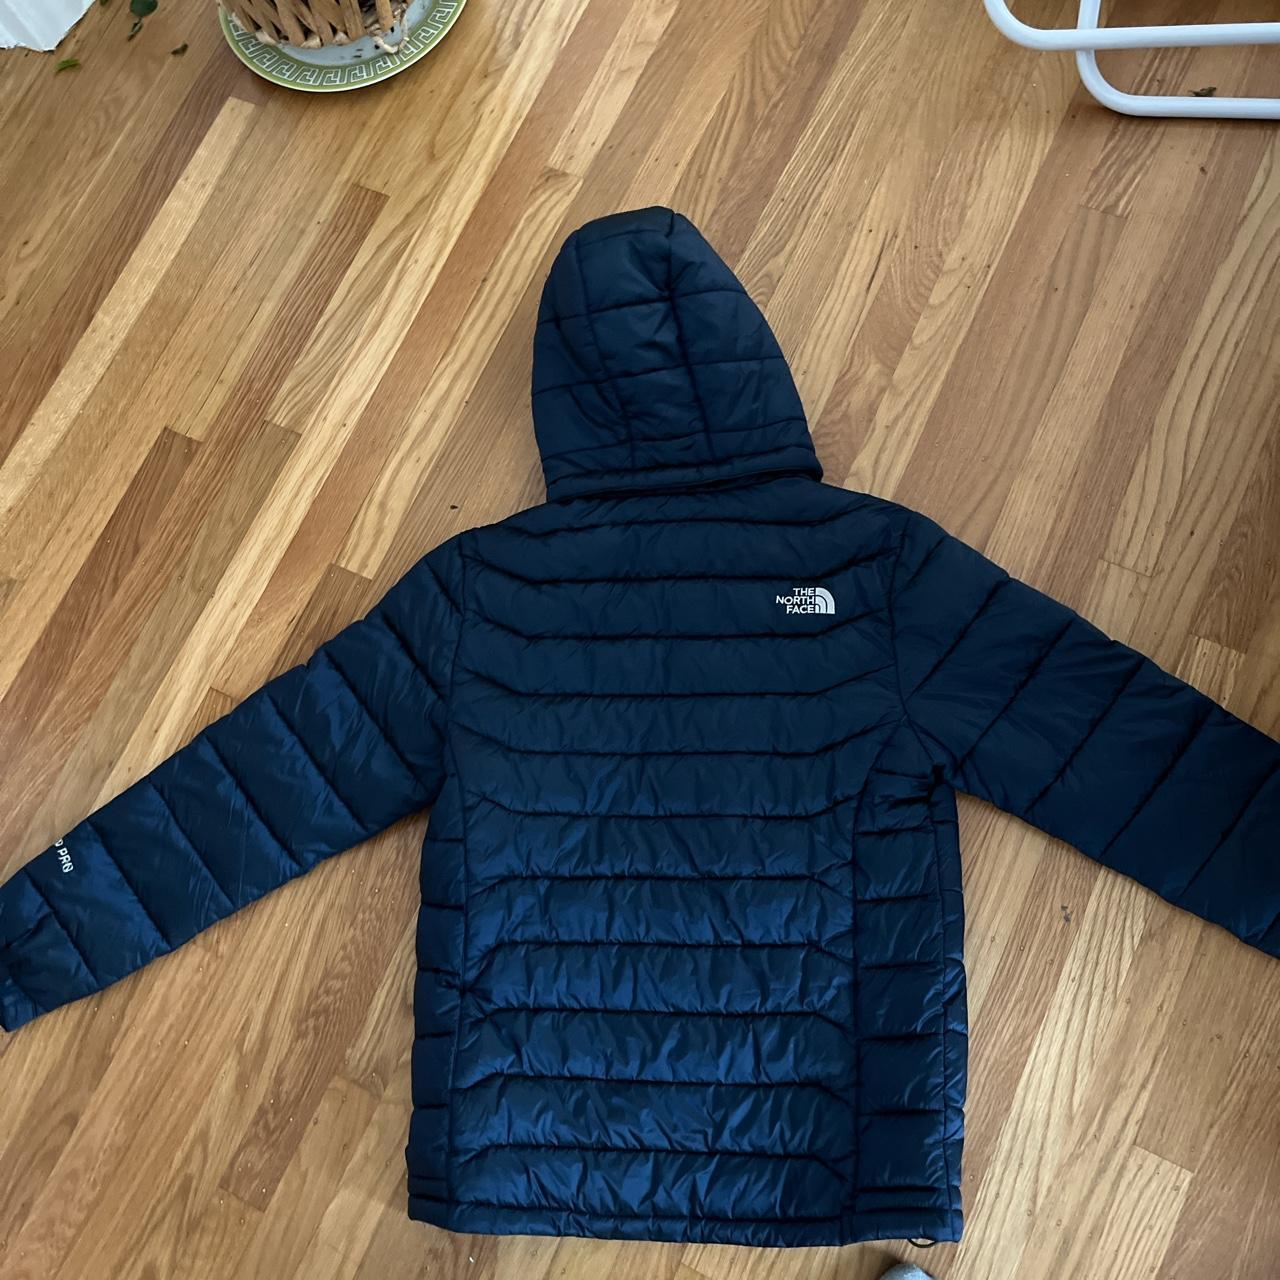 Product Image 2 - North face puffer 700 pro